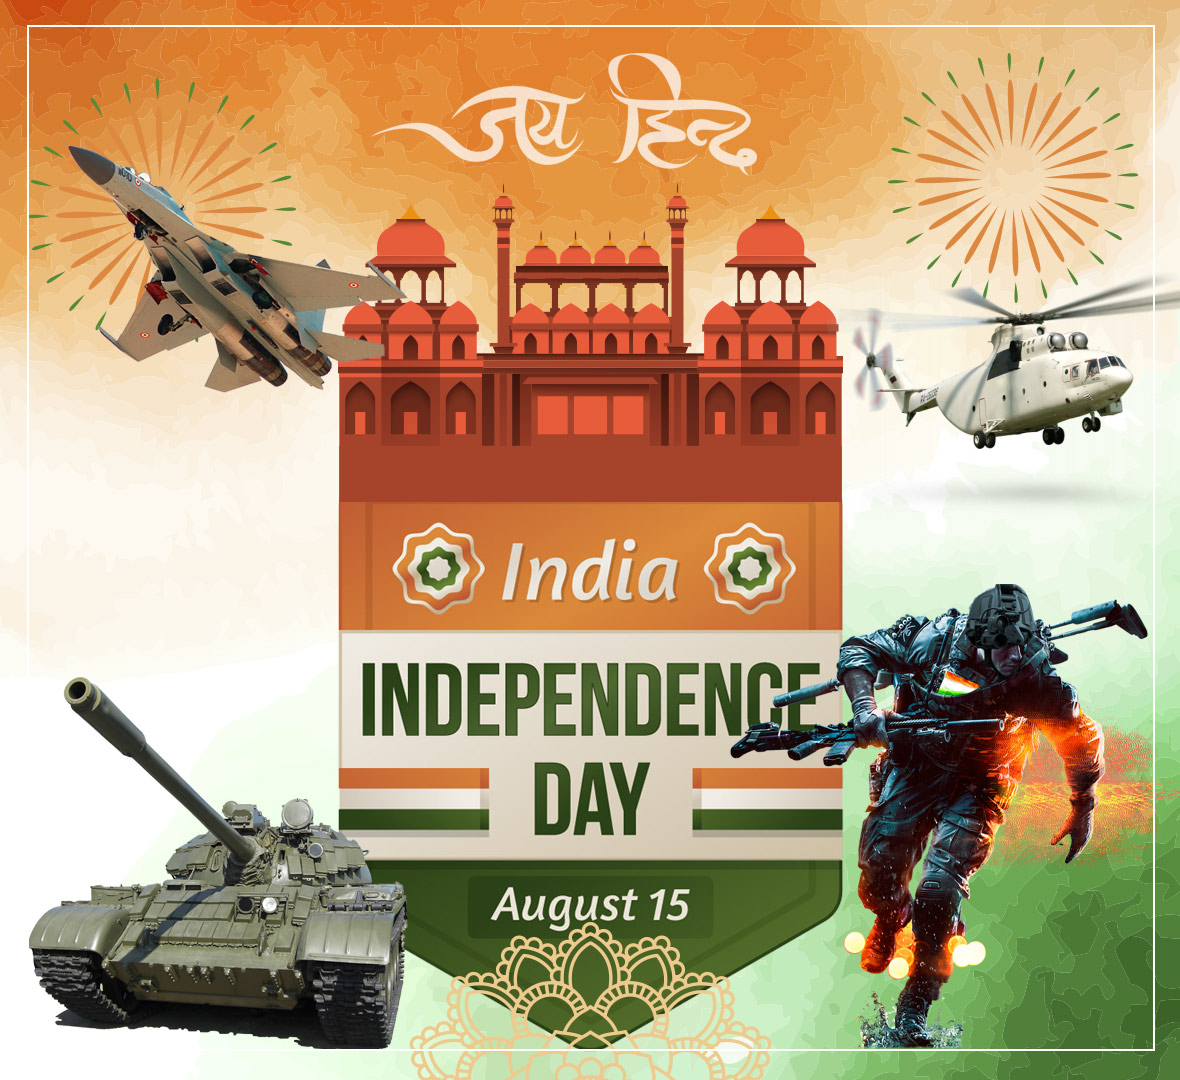 15 August Indian army independence day images, greetings, wallpapers and status